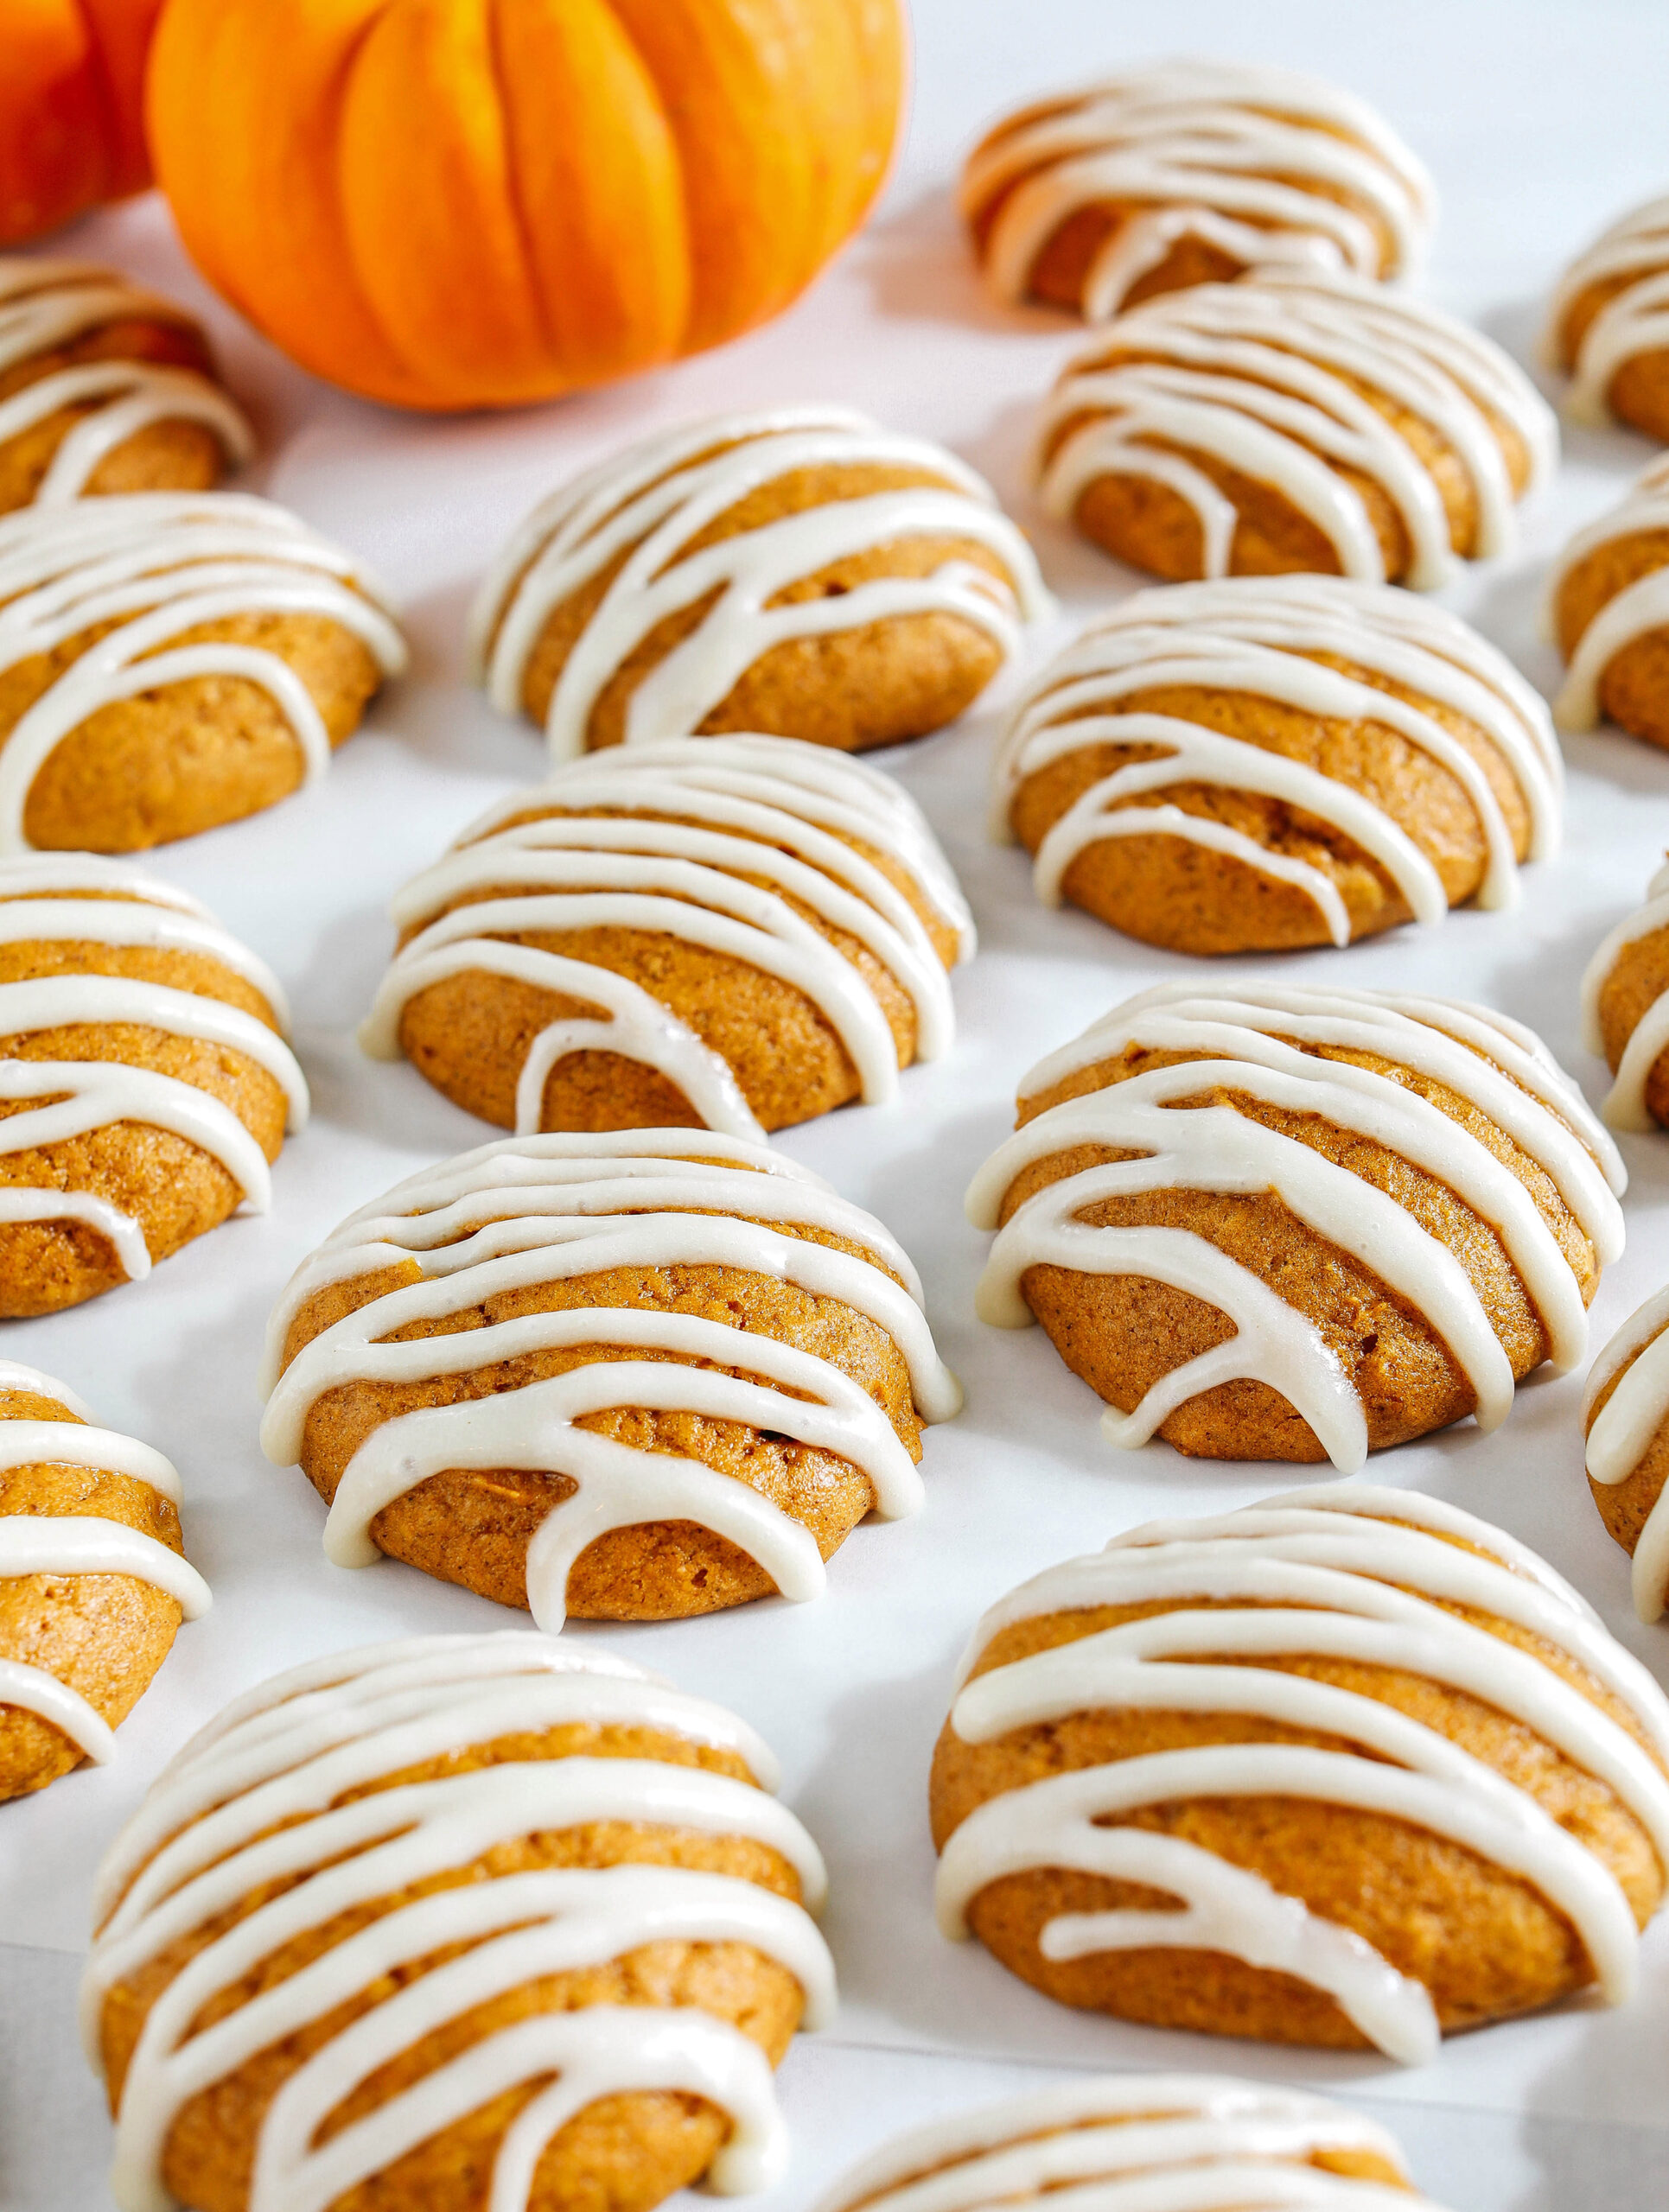 Pillowy soft Iced Pumpkin Cookies made healthier with whole wheat flour and zero butter or refined sugar all drizzled with a delicious maple cream cheese icing!  These cake-like pumpkin cookies make the perfect fall treat to enjoy this season.